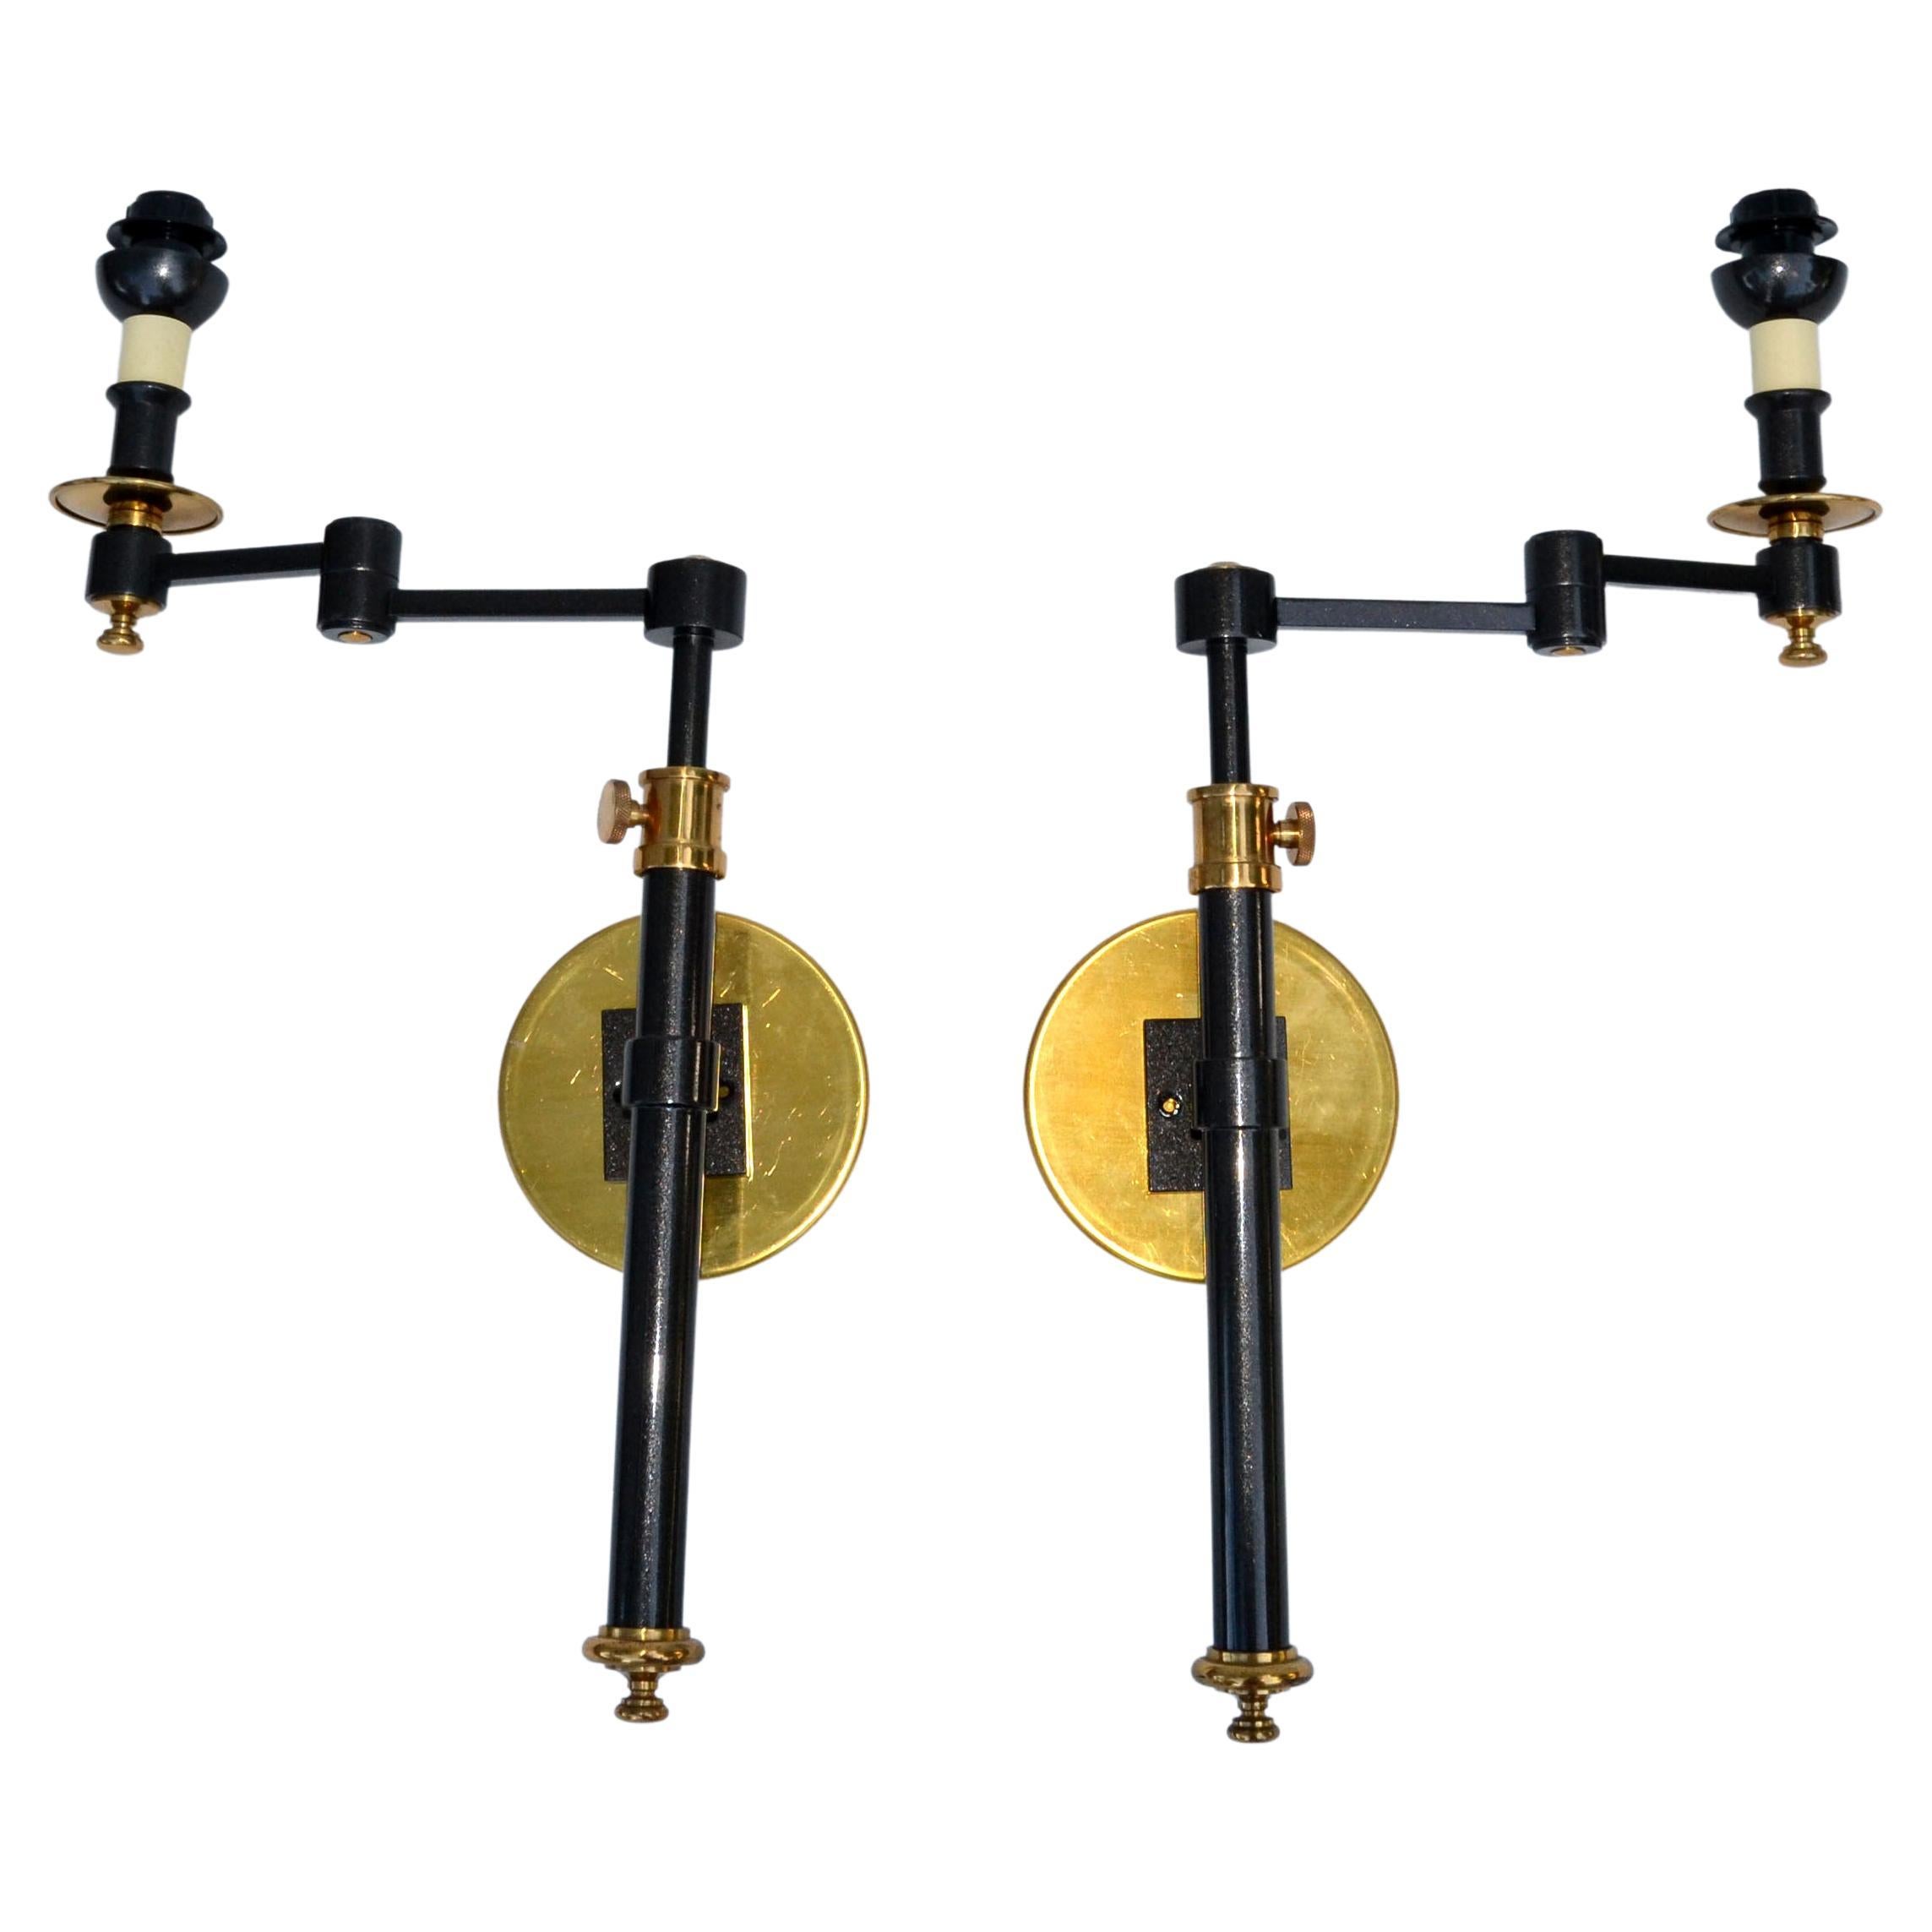 Very elegant pair of brass retractable Maison Jansen style sconces France with drum shade in black & gold.
Wired for the US, each sconce takes one light bulb with max. 60 watts. 
Measurement: max projection to the wall 14.75 inches